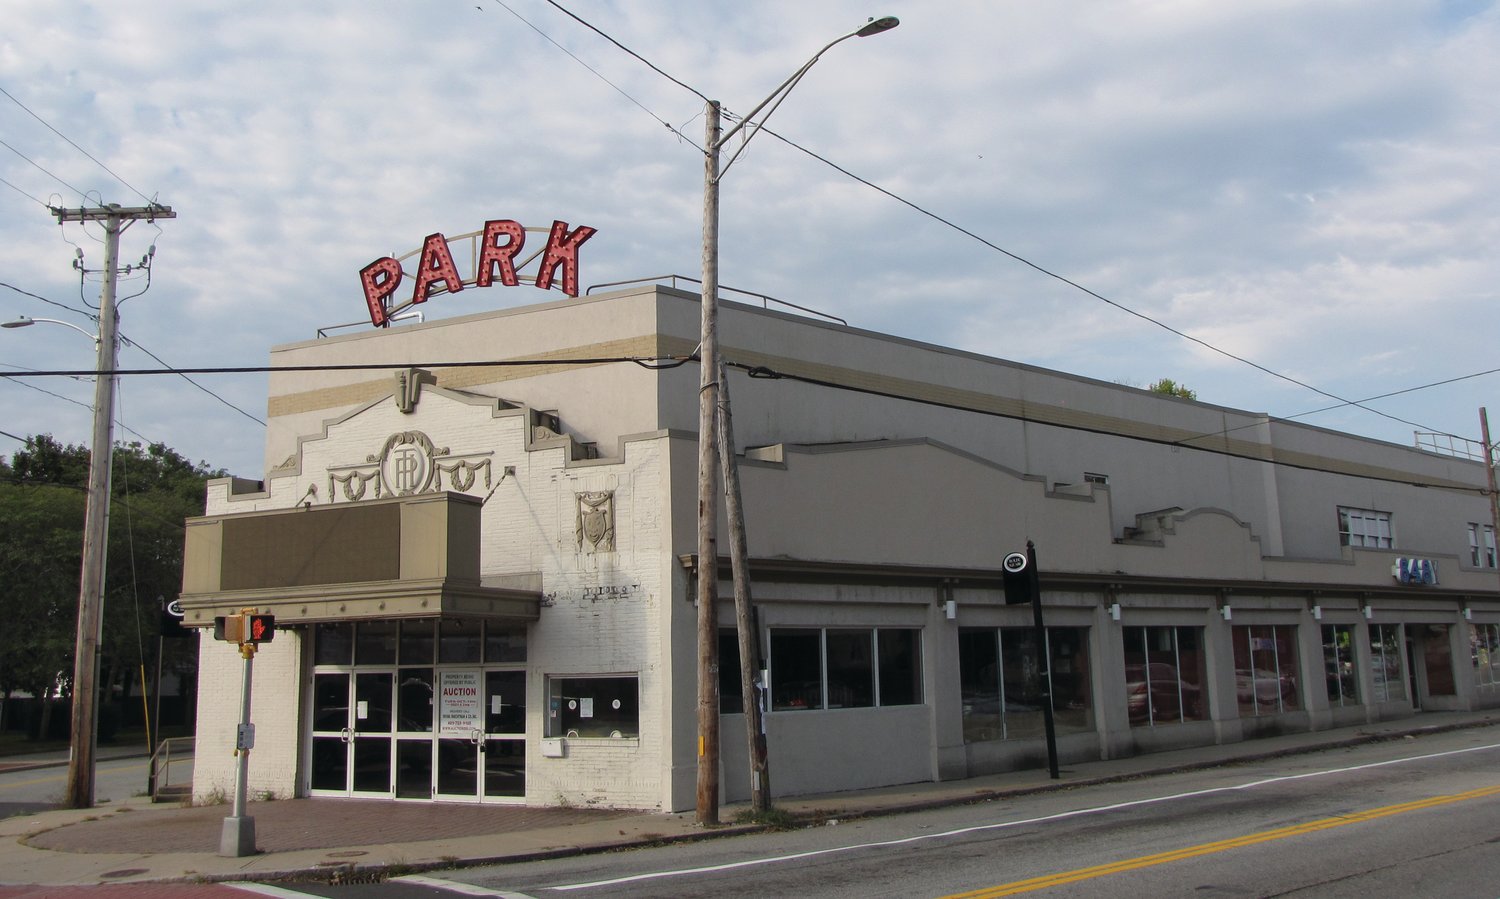 LOCAL LANDMARK: The Park Theatre, which has been closed for events since the onset of the pandemic, may soon become the home of a new performing arts venue with additional components. Ed Brady and Jeff Quinlan have reached a purchase agreement with the facility’s current owner, with hopes to close the transaction this fall.